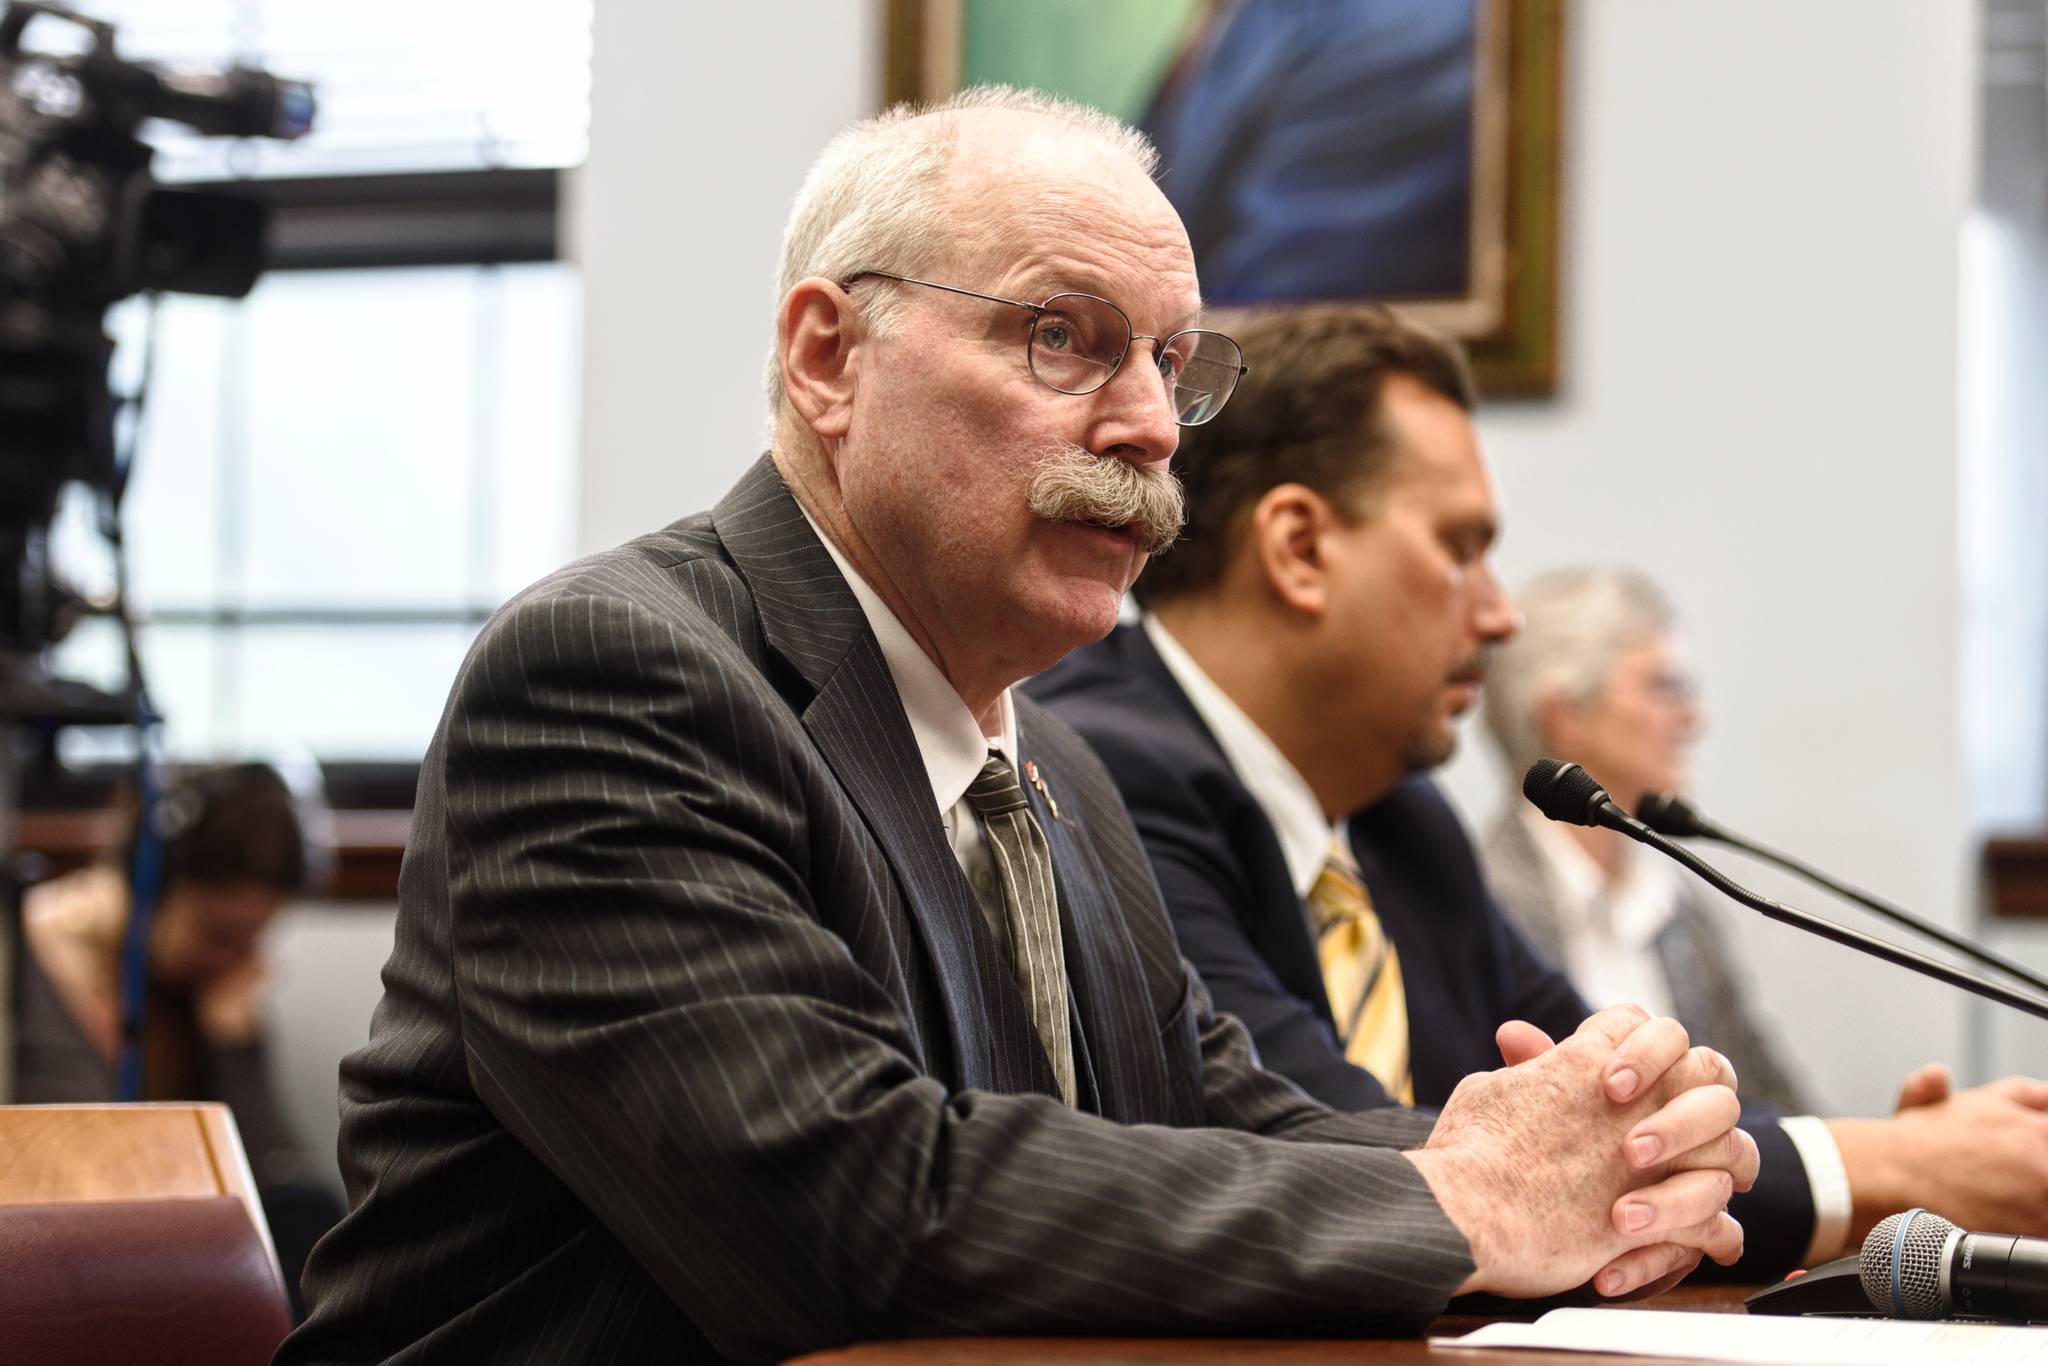 Sen. Bert Stedman, R-Sitka, presents SB 1002, a bill to provide a Permanent Fund Dividend of $1,600, to the Senate Rules Committee at the Capitol on Monday, June 3, 2019. (Michael Penn | Juneau Empire)